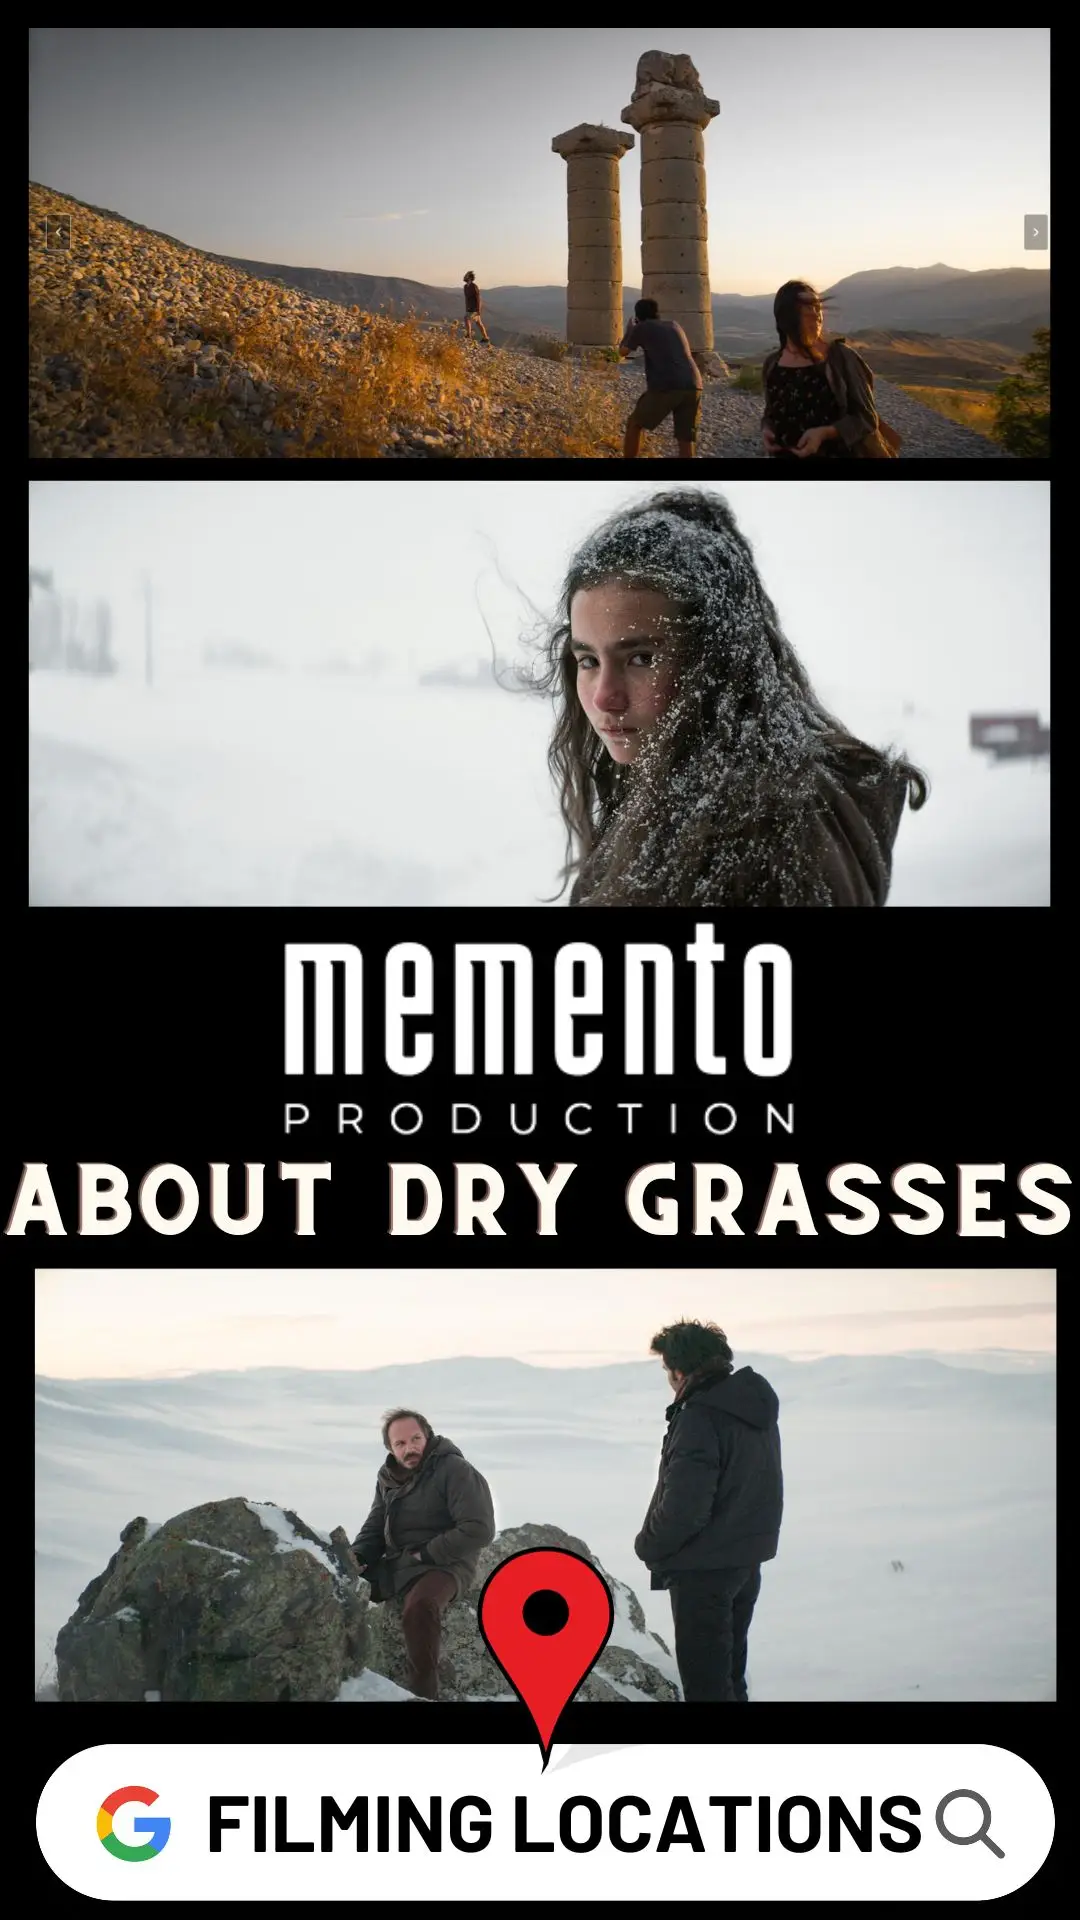 About Dry Grasses Filming Locations